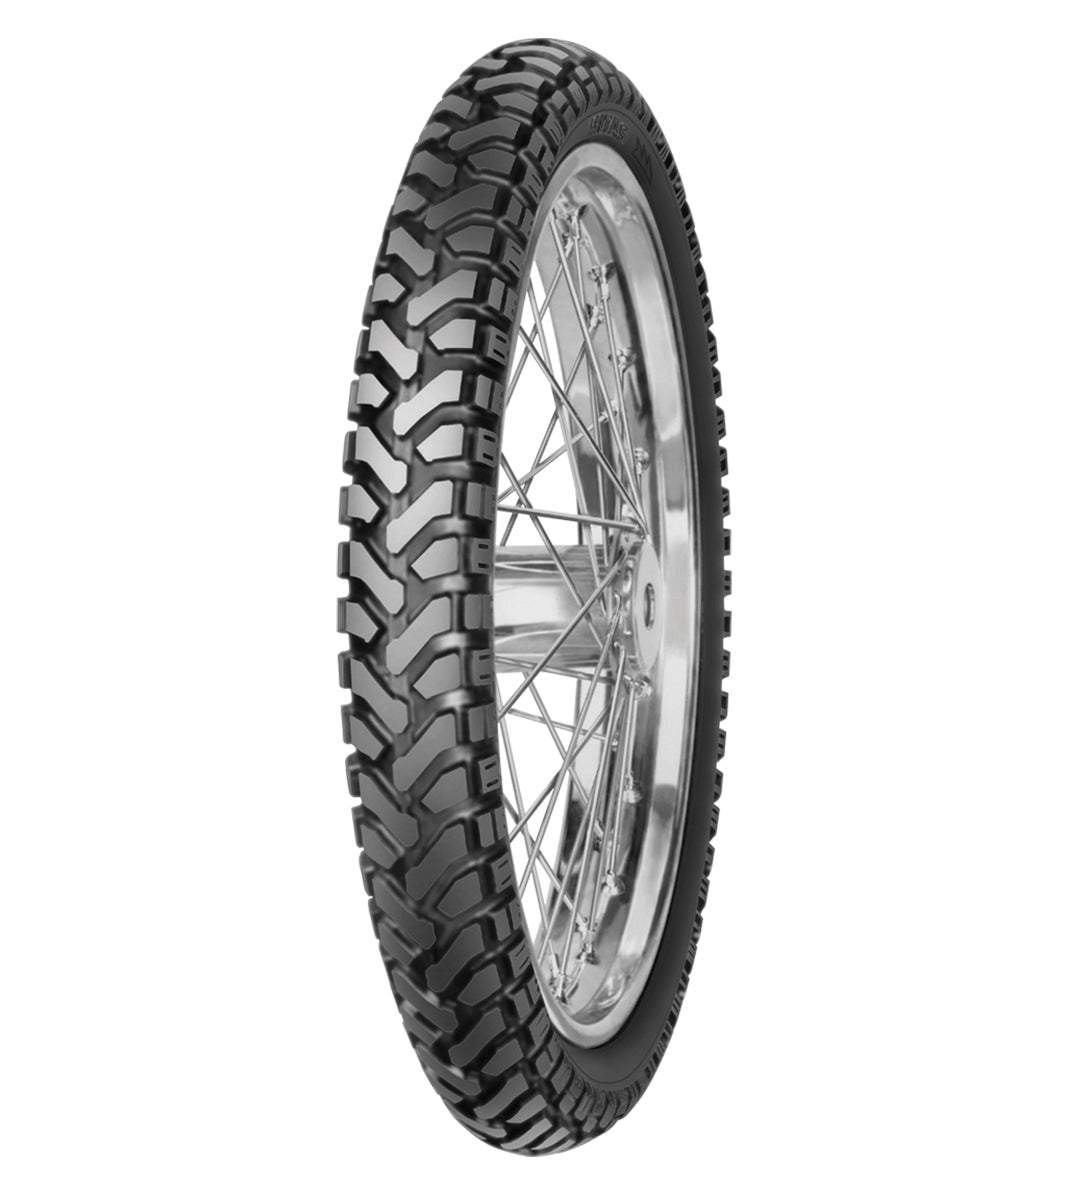 Mitas E-07 ENDURO 90/90-21 Trail OFF Trail 54T No Stripe Tubeless Front Tire, 224636, 90/90-21, Adventure Touring, E Series, E-07 Enduro, Front, Trail, Trail OFF, Tires - Imported and distributed in North &amp; South America by Lindeco Genuine Powersports - Premier Powersports Equipment and Accessories for Motorcycle Enthusiasts, Professional Riders and Dealers.